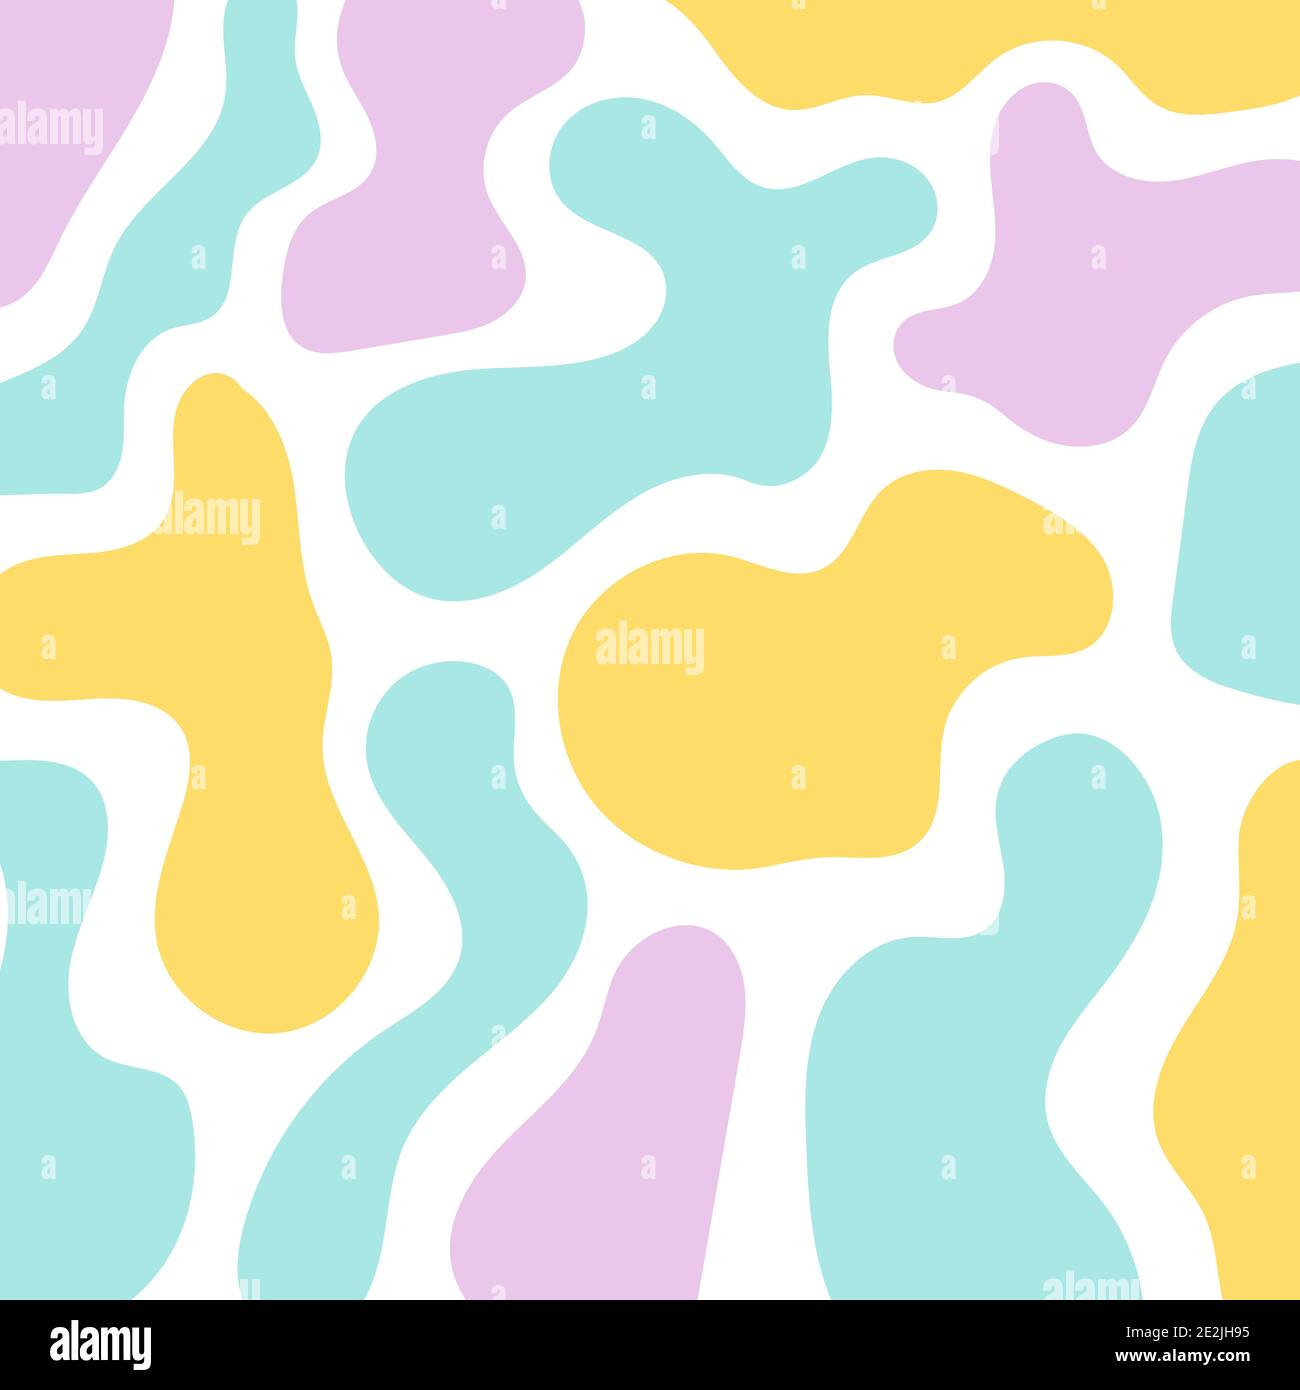 Colorful rounded shapes background. Organic forms. Vector illustration ...